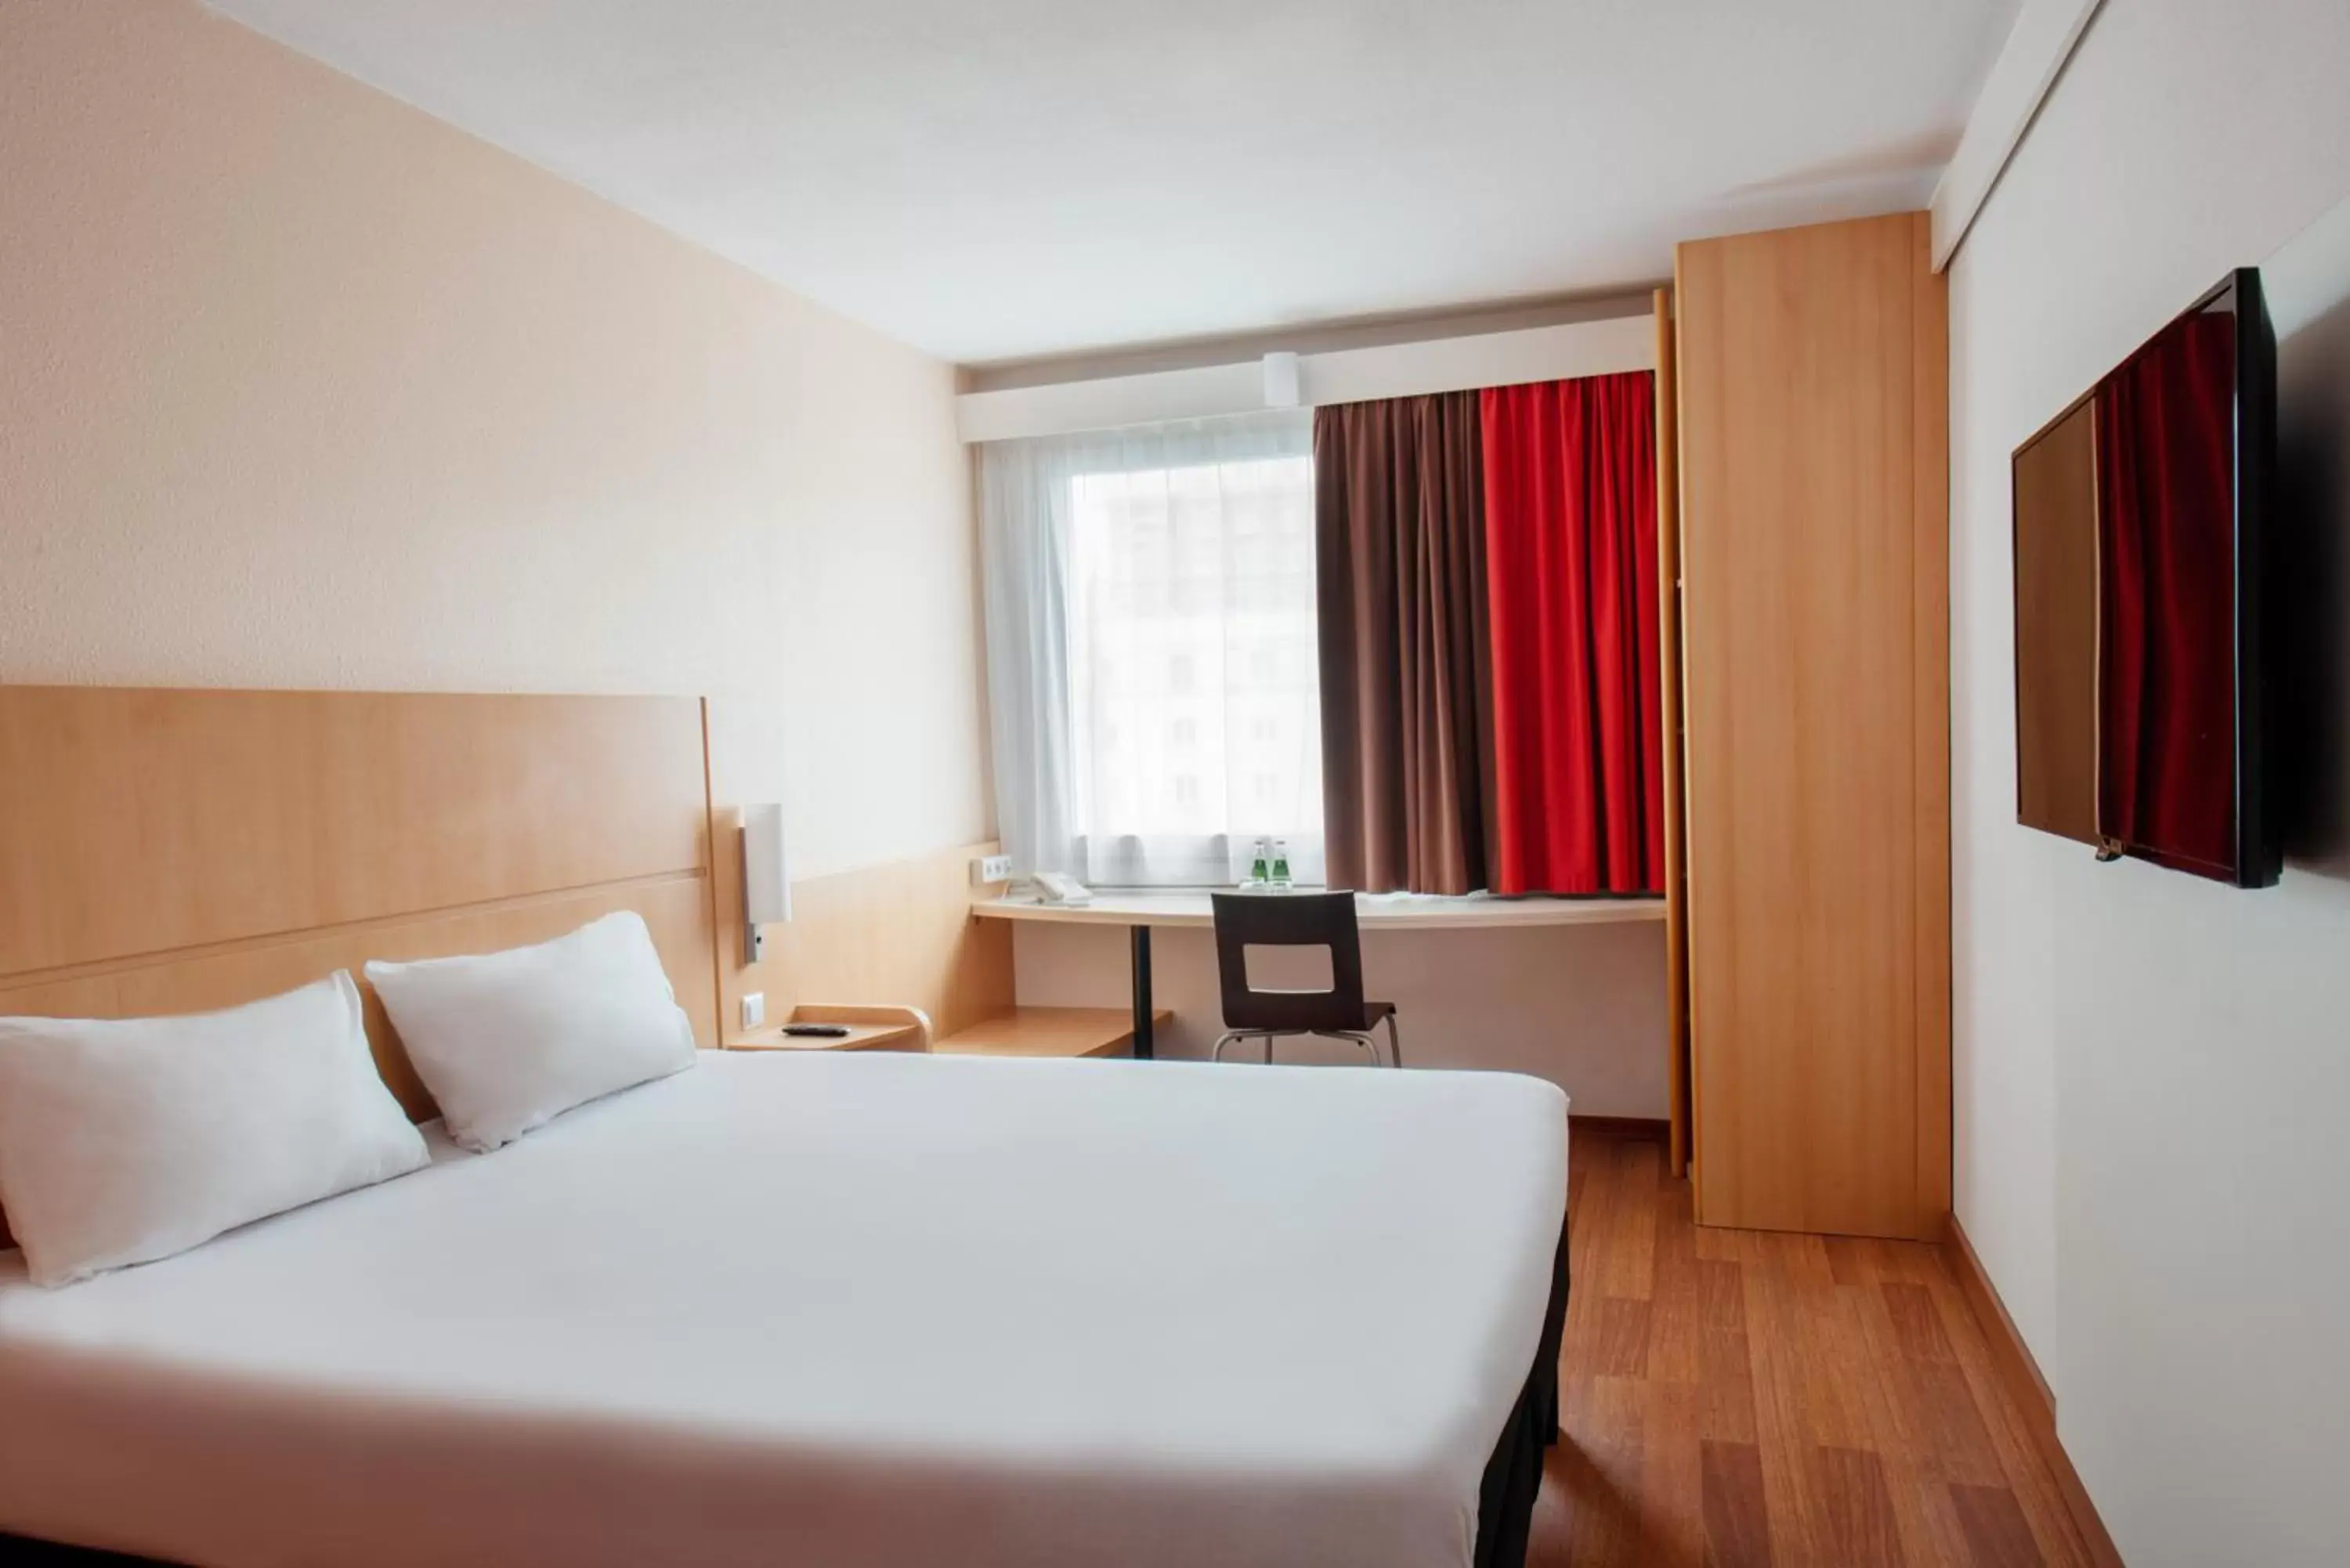 Standard Room with 1 Double Bed in Ibis Warszawa Stare Miasto